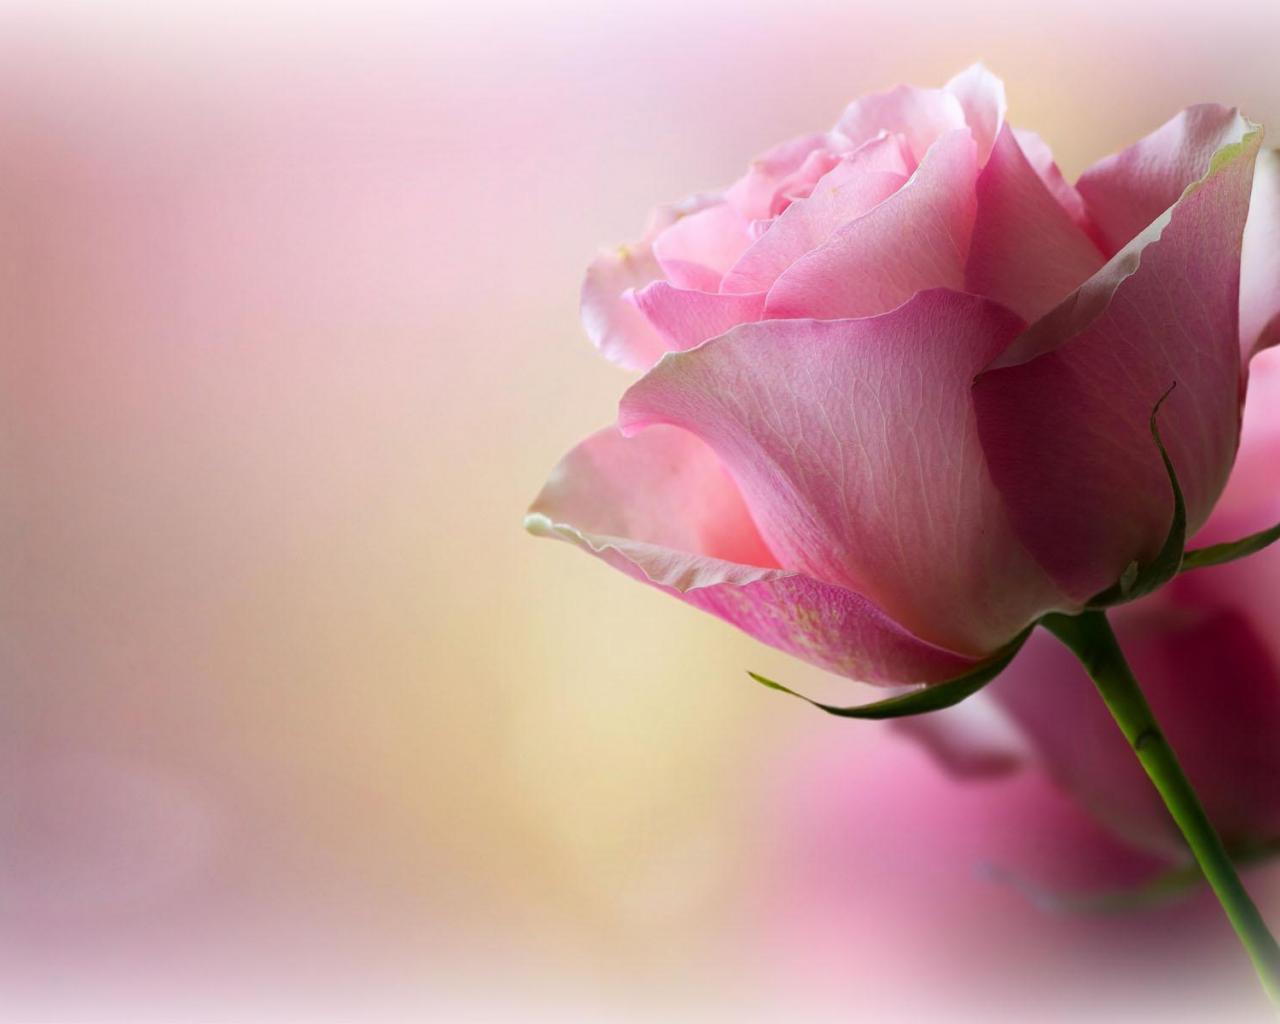 Soft Pink Rose High Quality And Resolution Wallpaper On